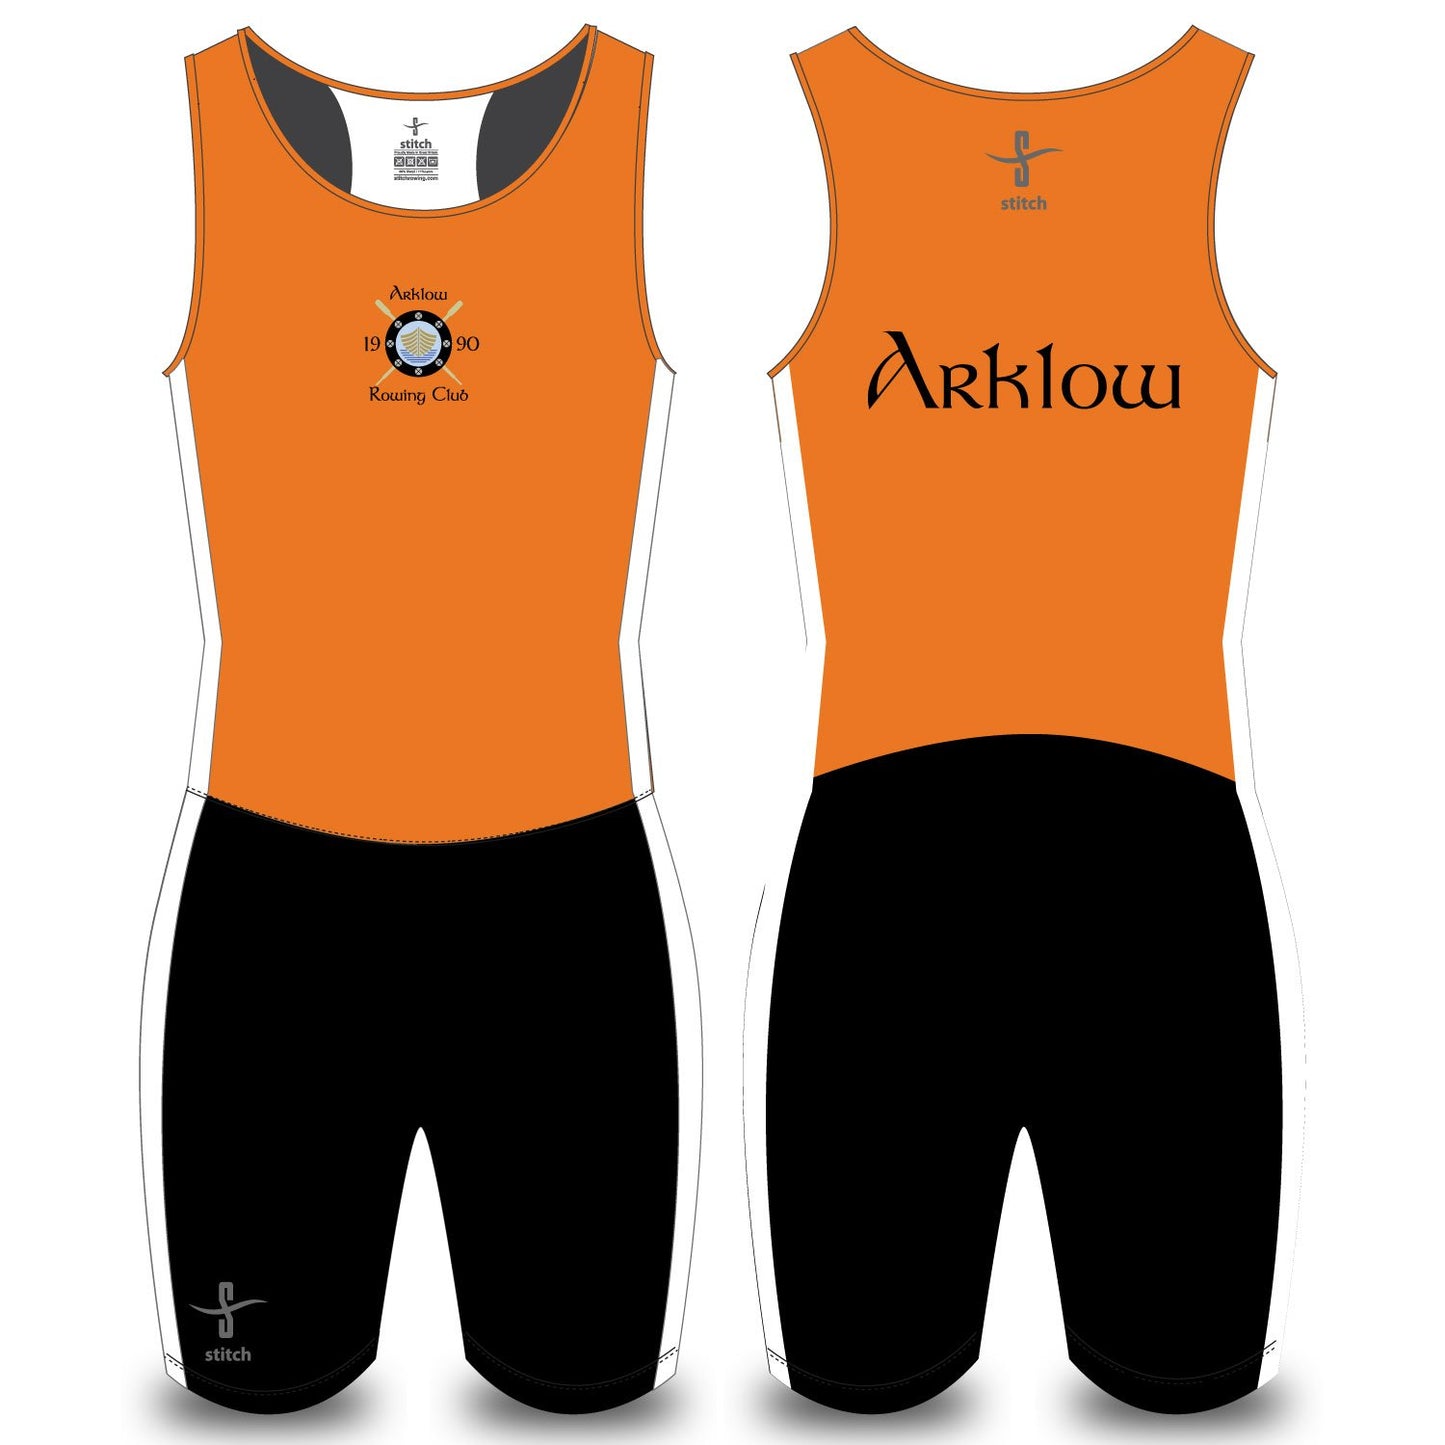 Arklow Rowing Club AIO